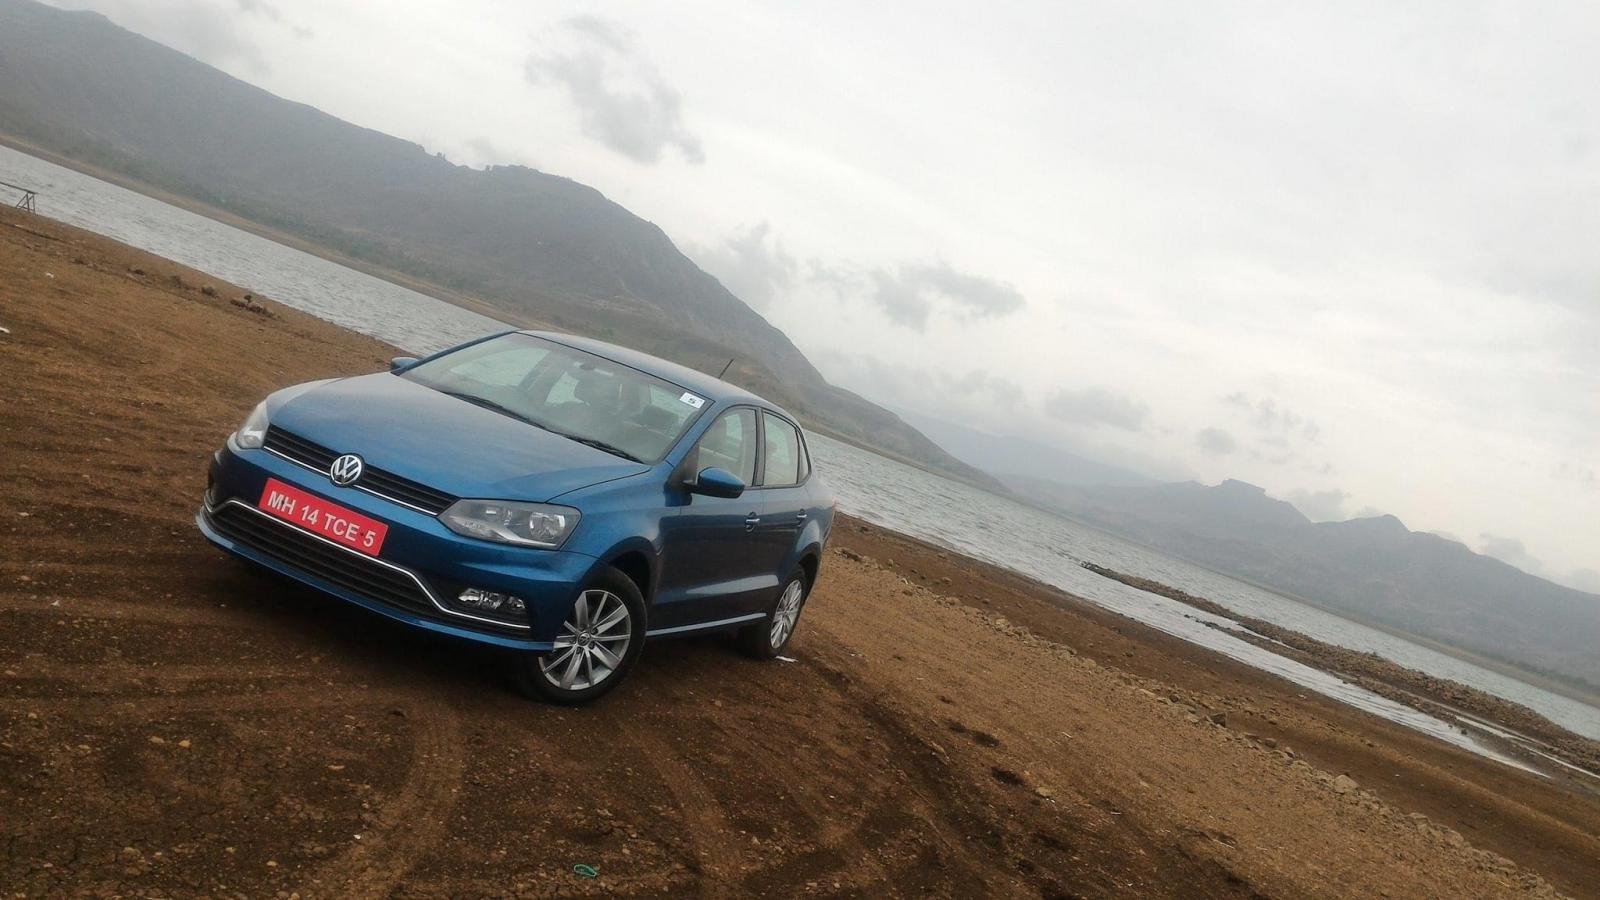 End of the Road for Maruti Dzire-rivalling VW Ameo